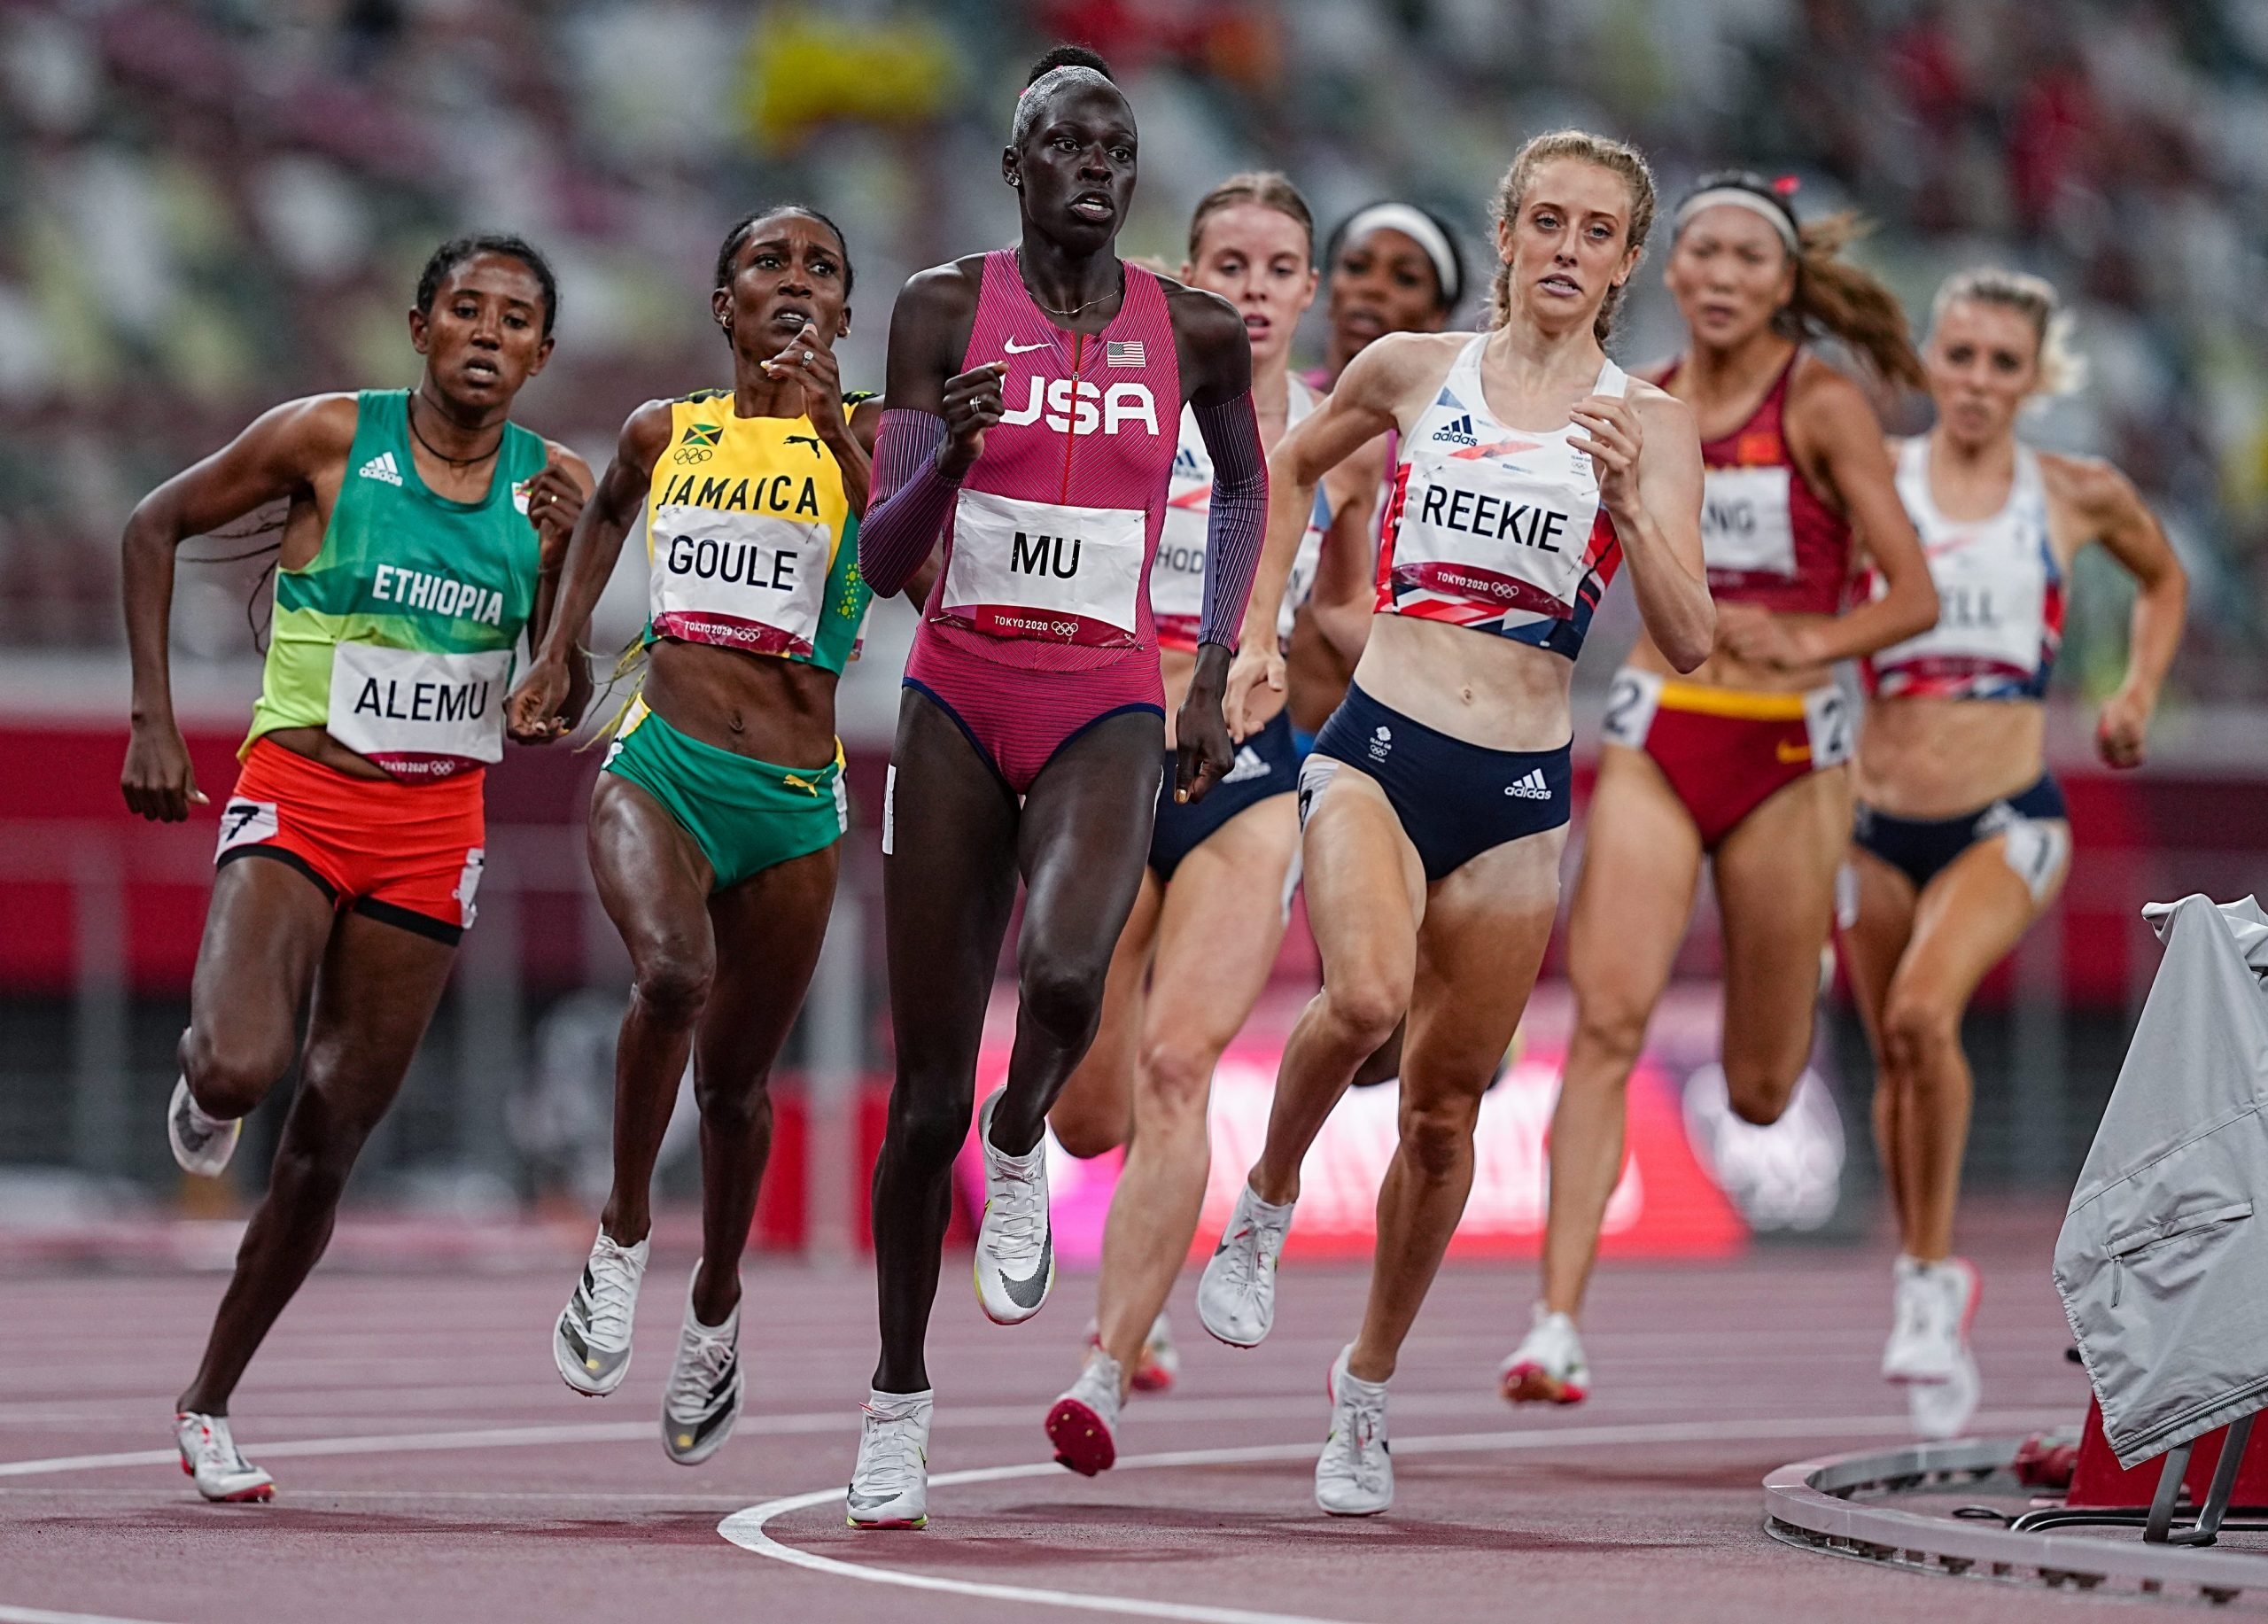 Runners wearing Nike 'super shoes' dominated in the Olympics, taking